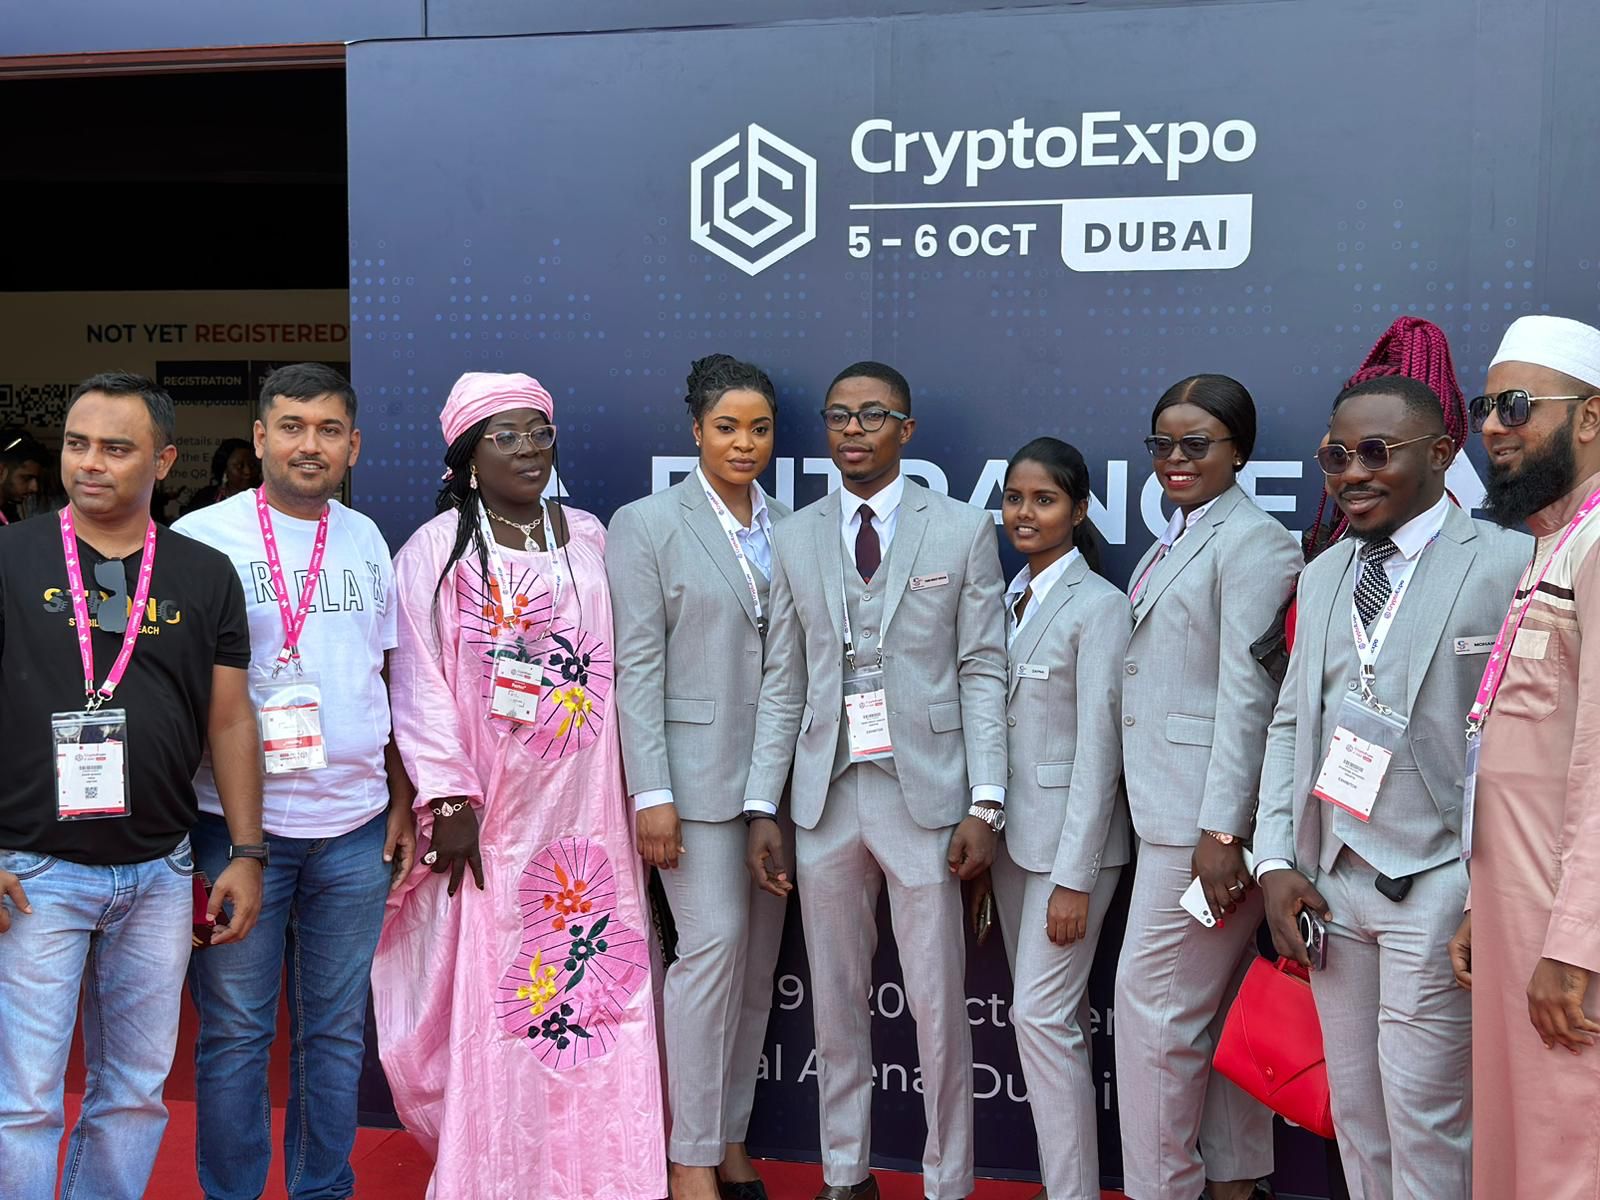 , CYF develops a community-driven token for African crypto traders.